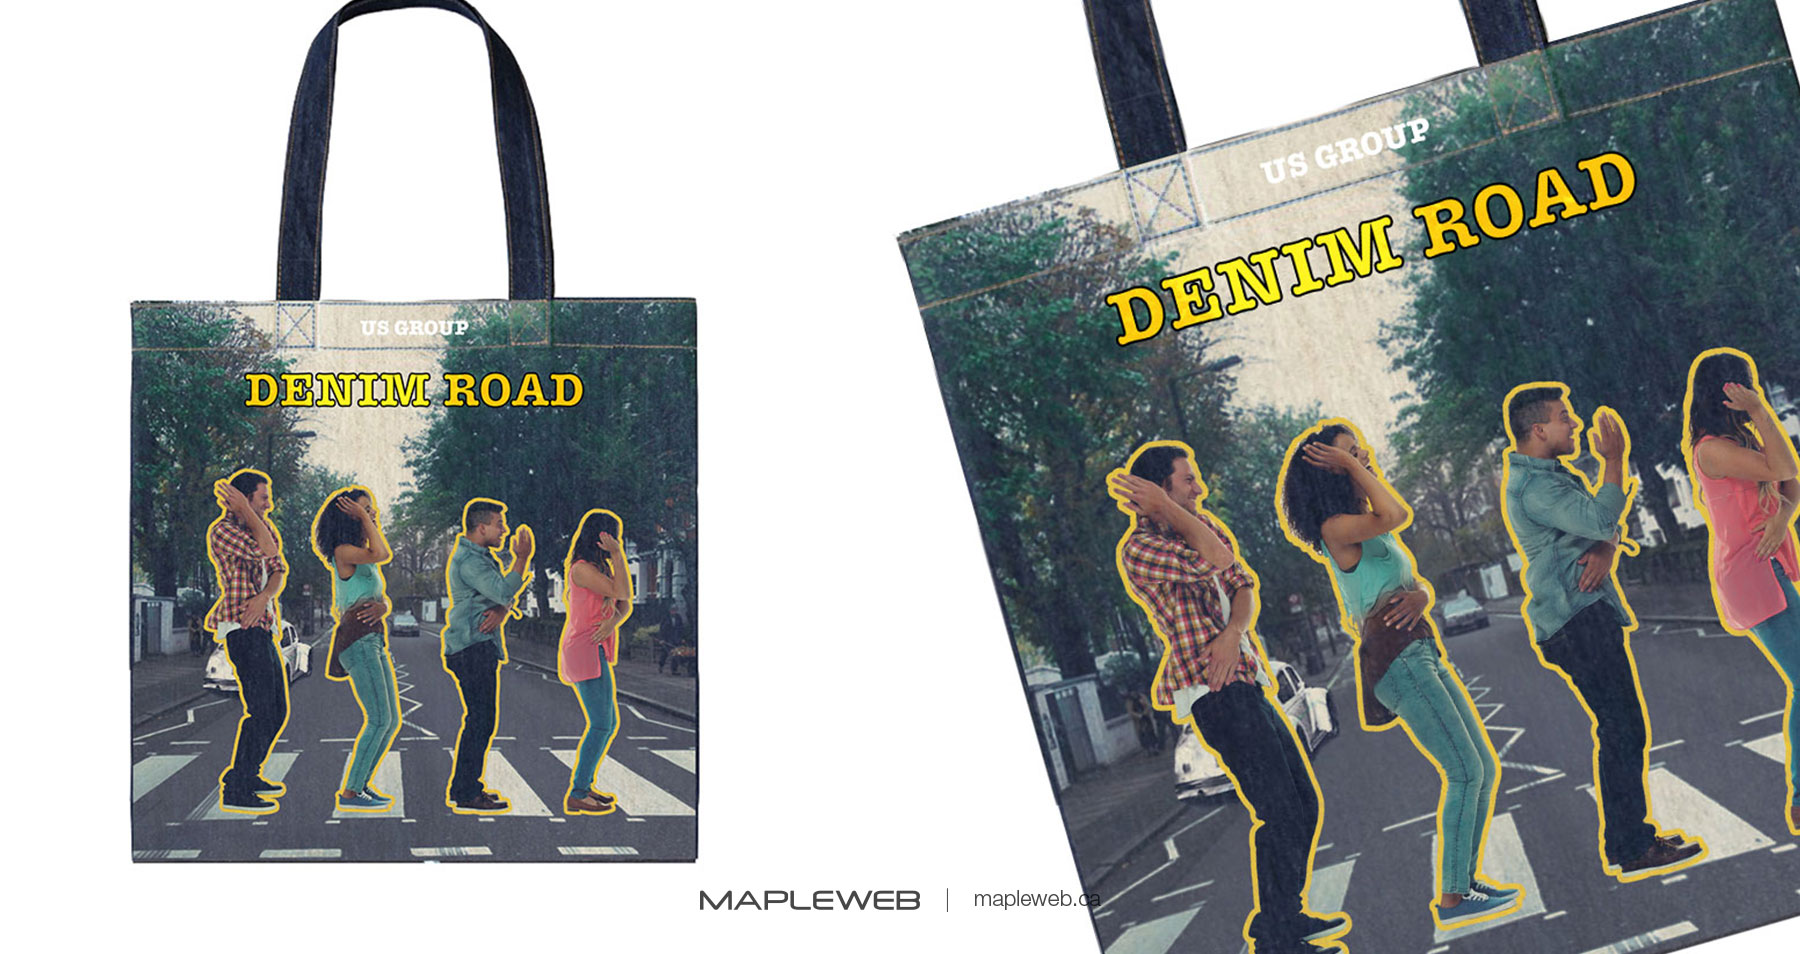 Us Apparel Brand design by Mapleweb Two Shopping Bags Displaying Logo and People Crossing Road